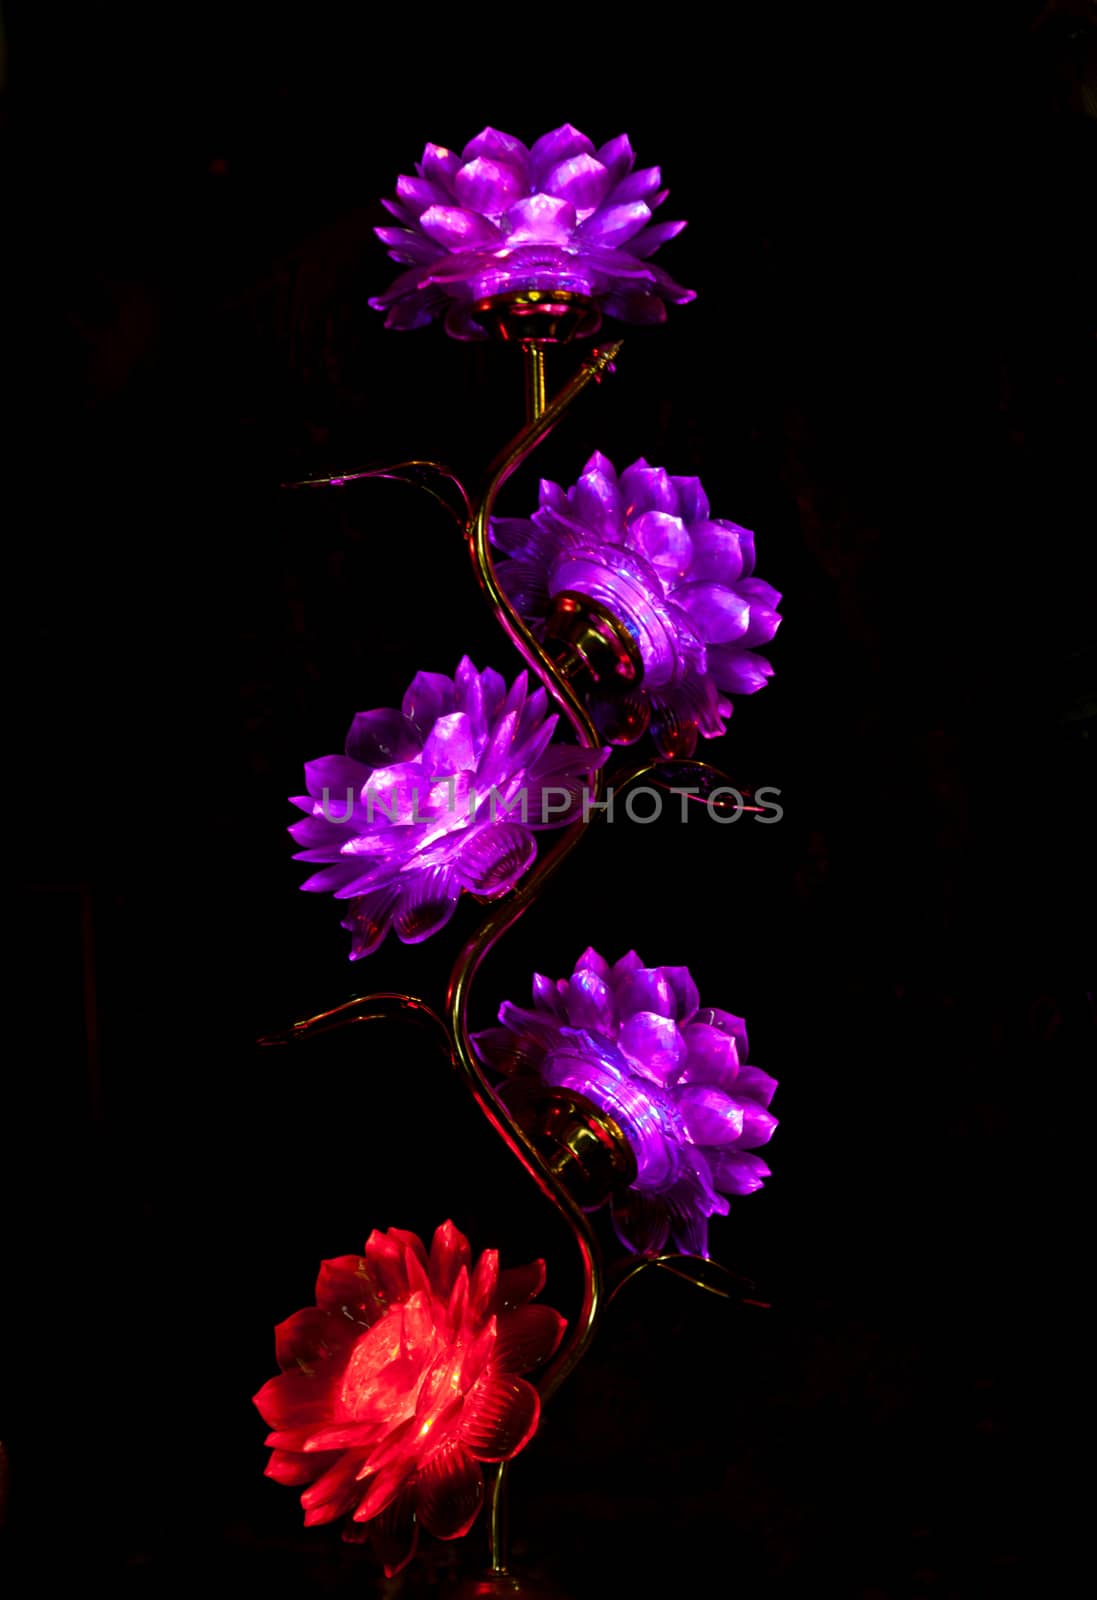 Flower lamp in a buddhist Temple, Vietnam by Goodday